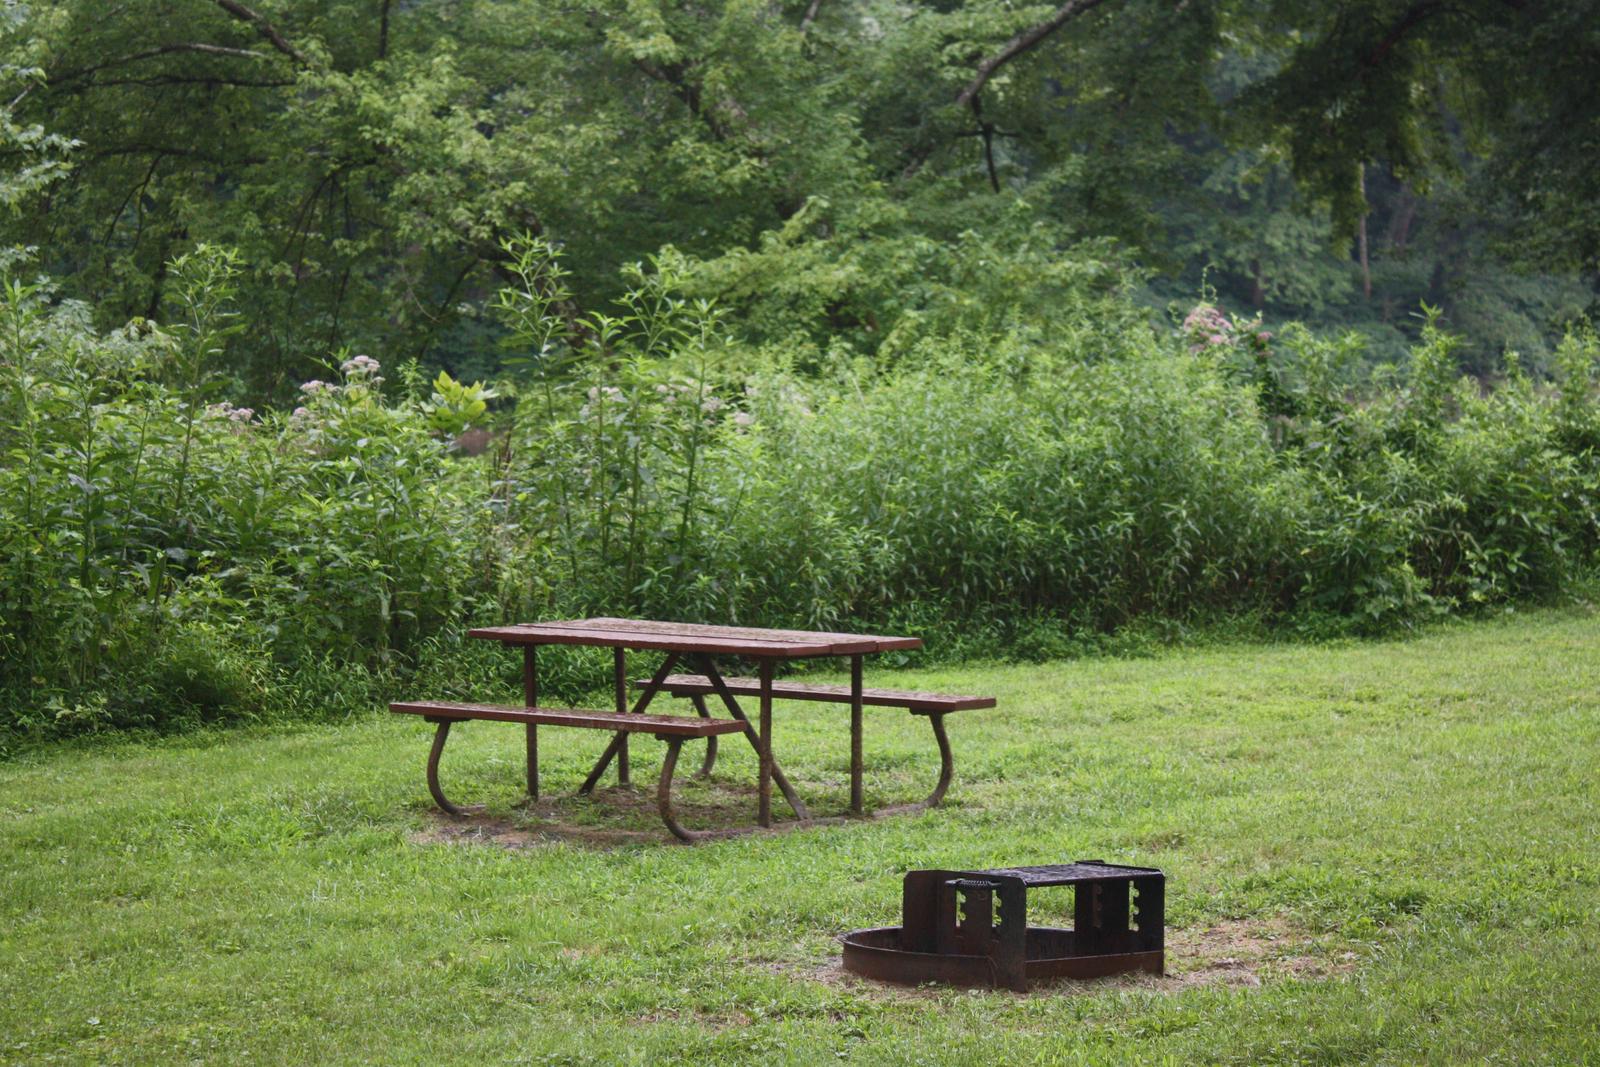 Campsite with picnic table and fire ring